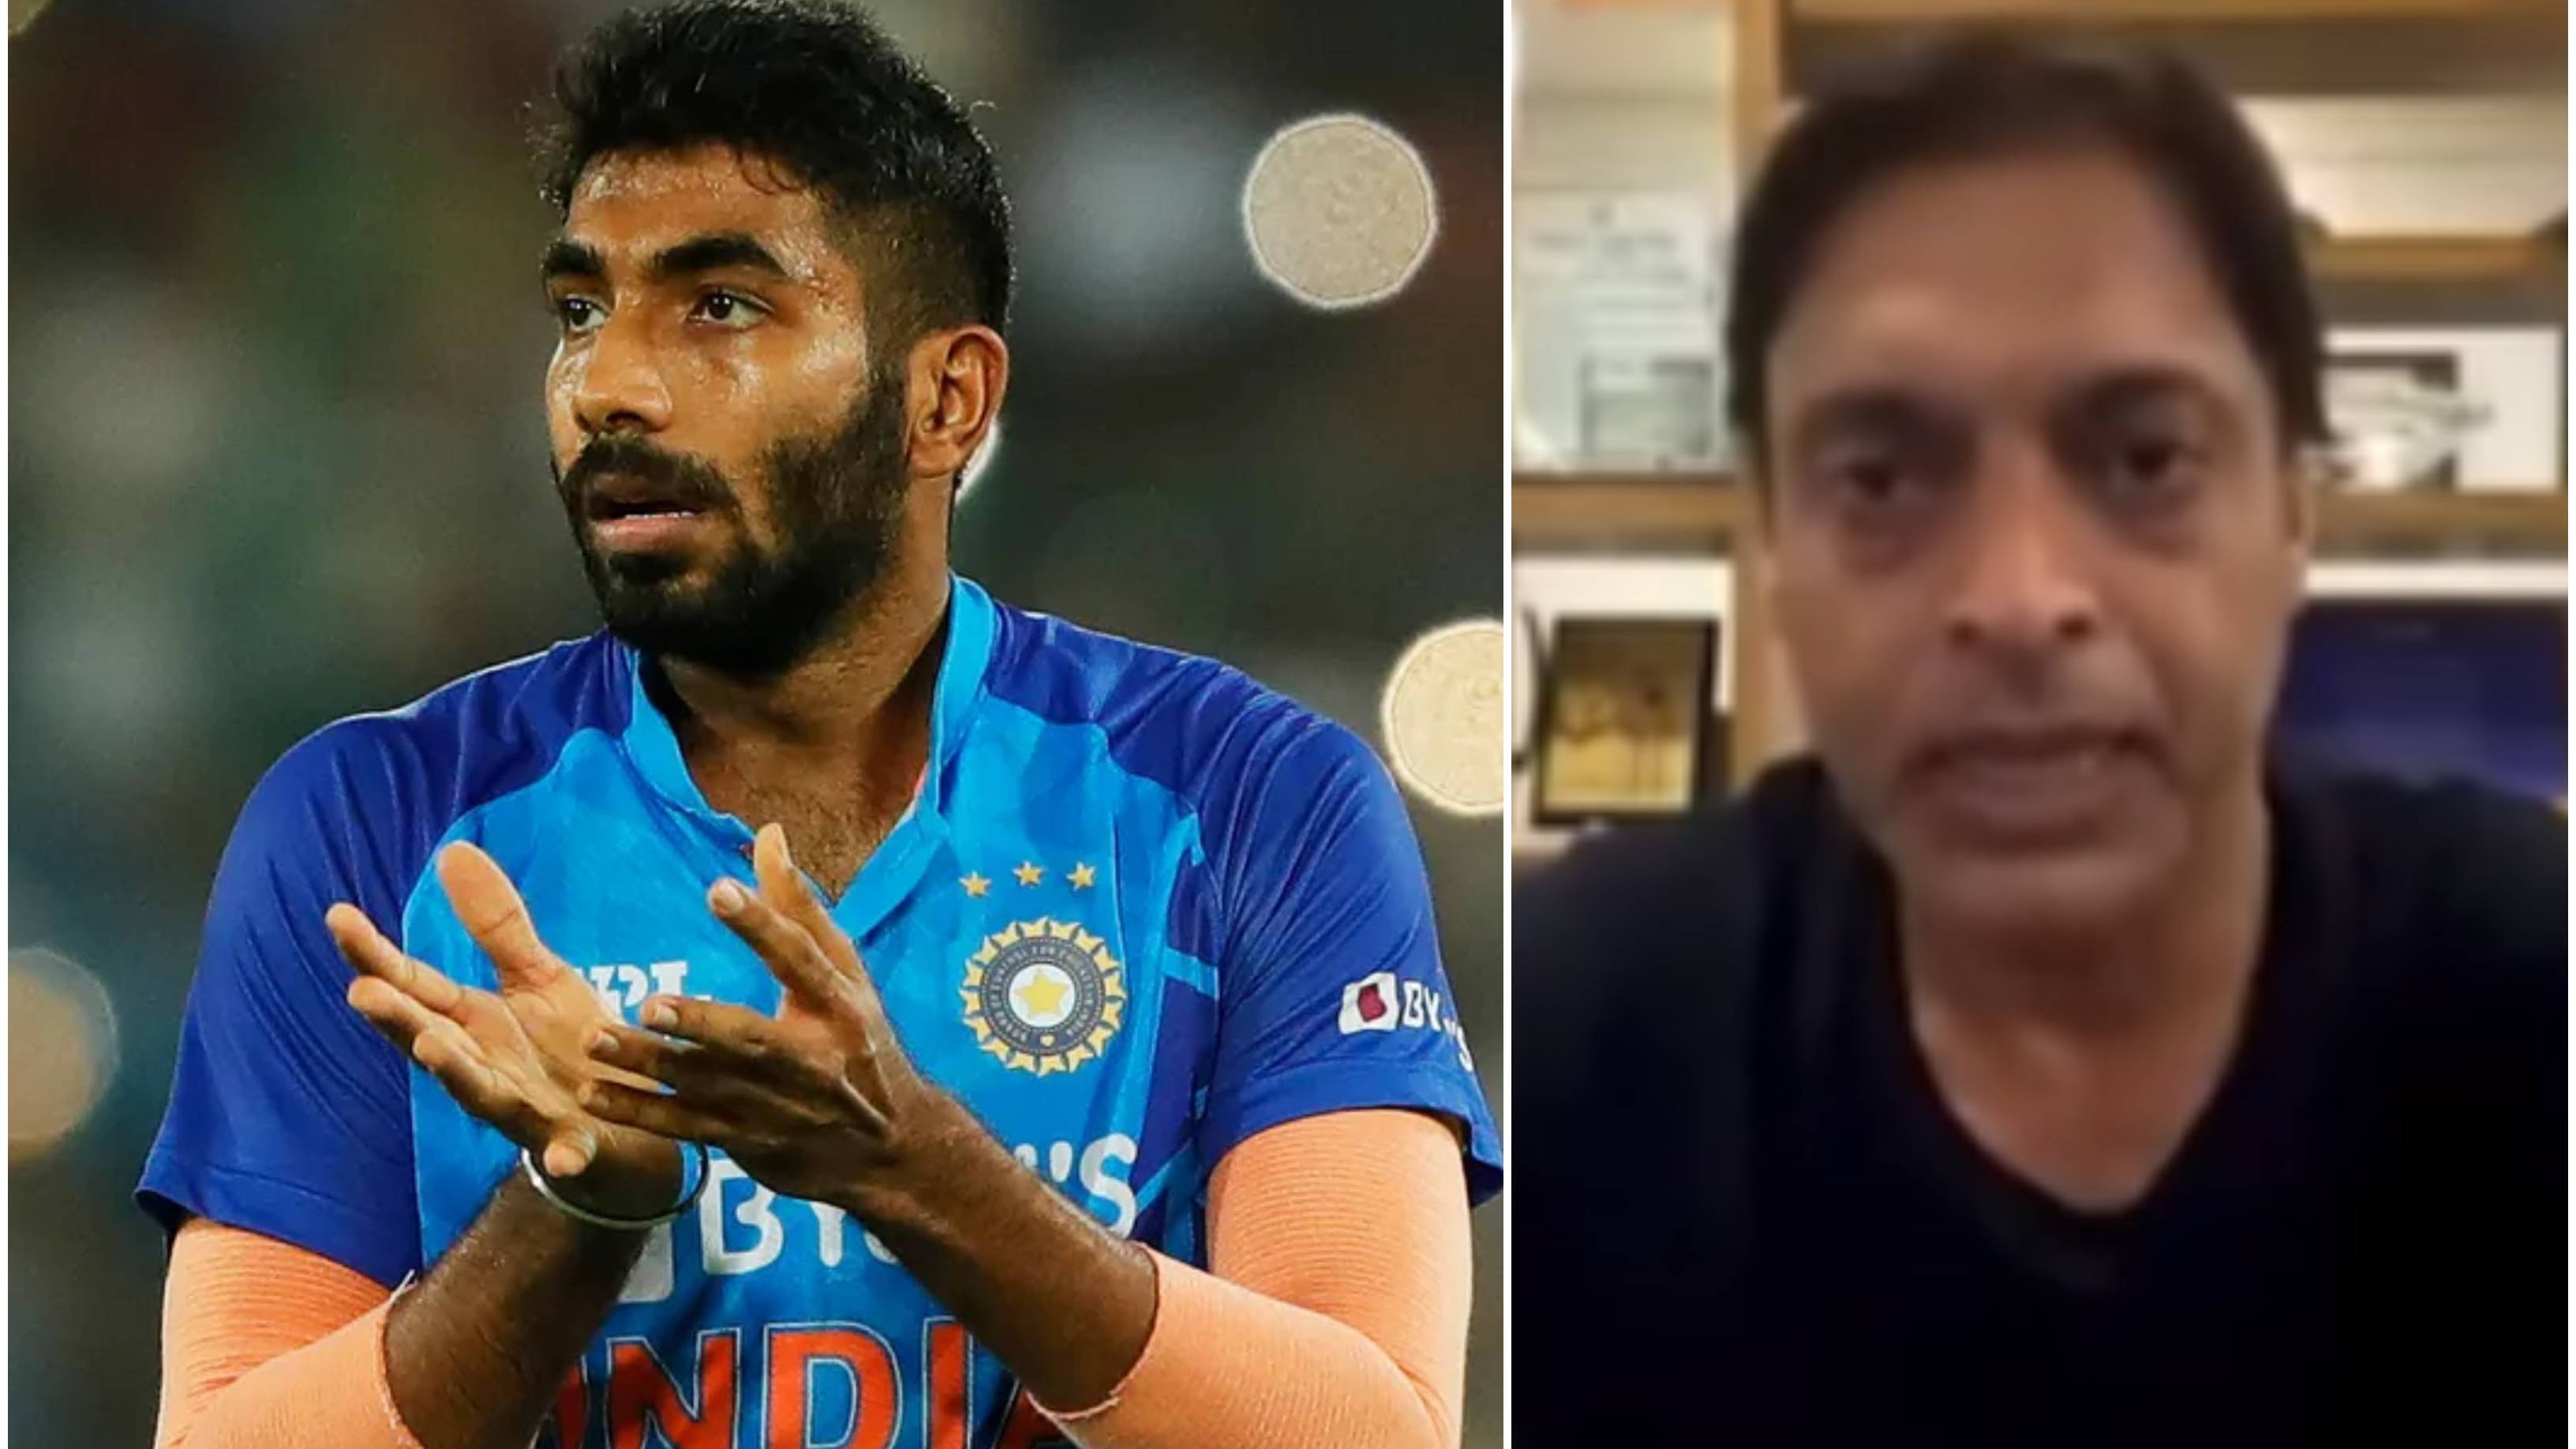 WATCH: Shoaib Akhtar's old video predicting “Bumrah’s back injury” goes viral after India pacer ruled out of T20 World Cup